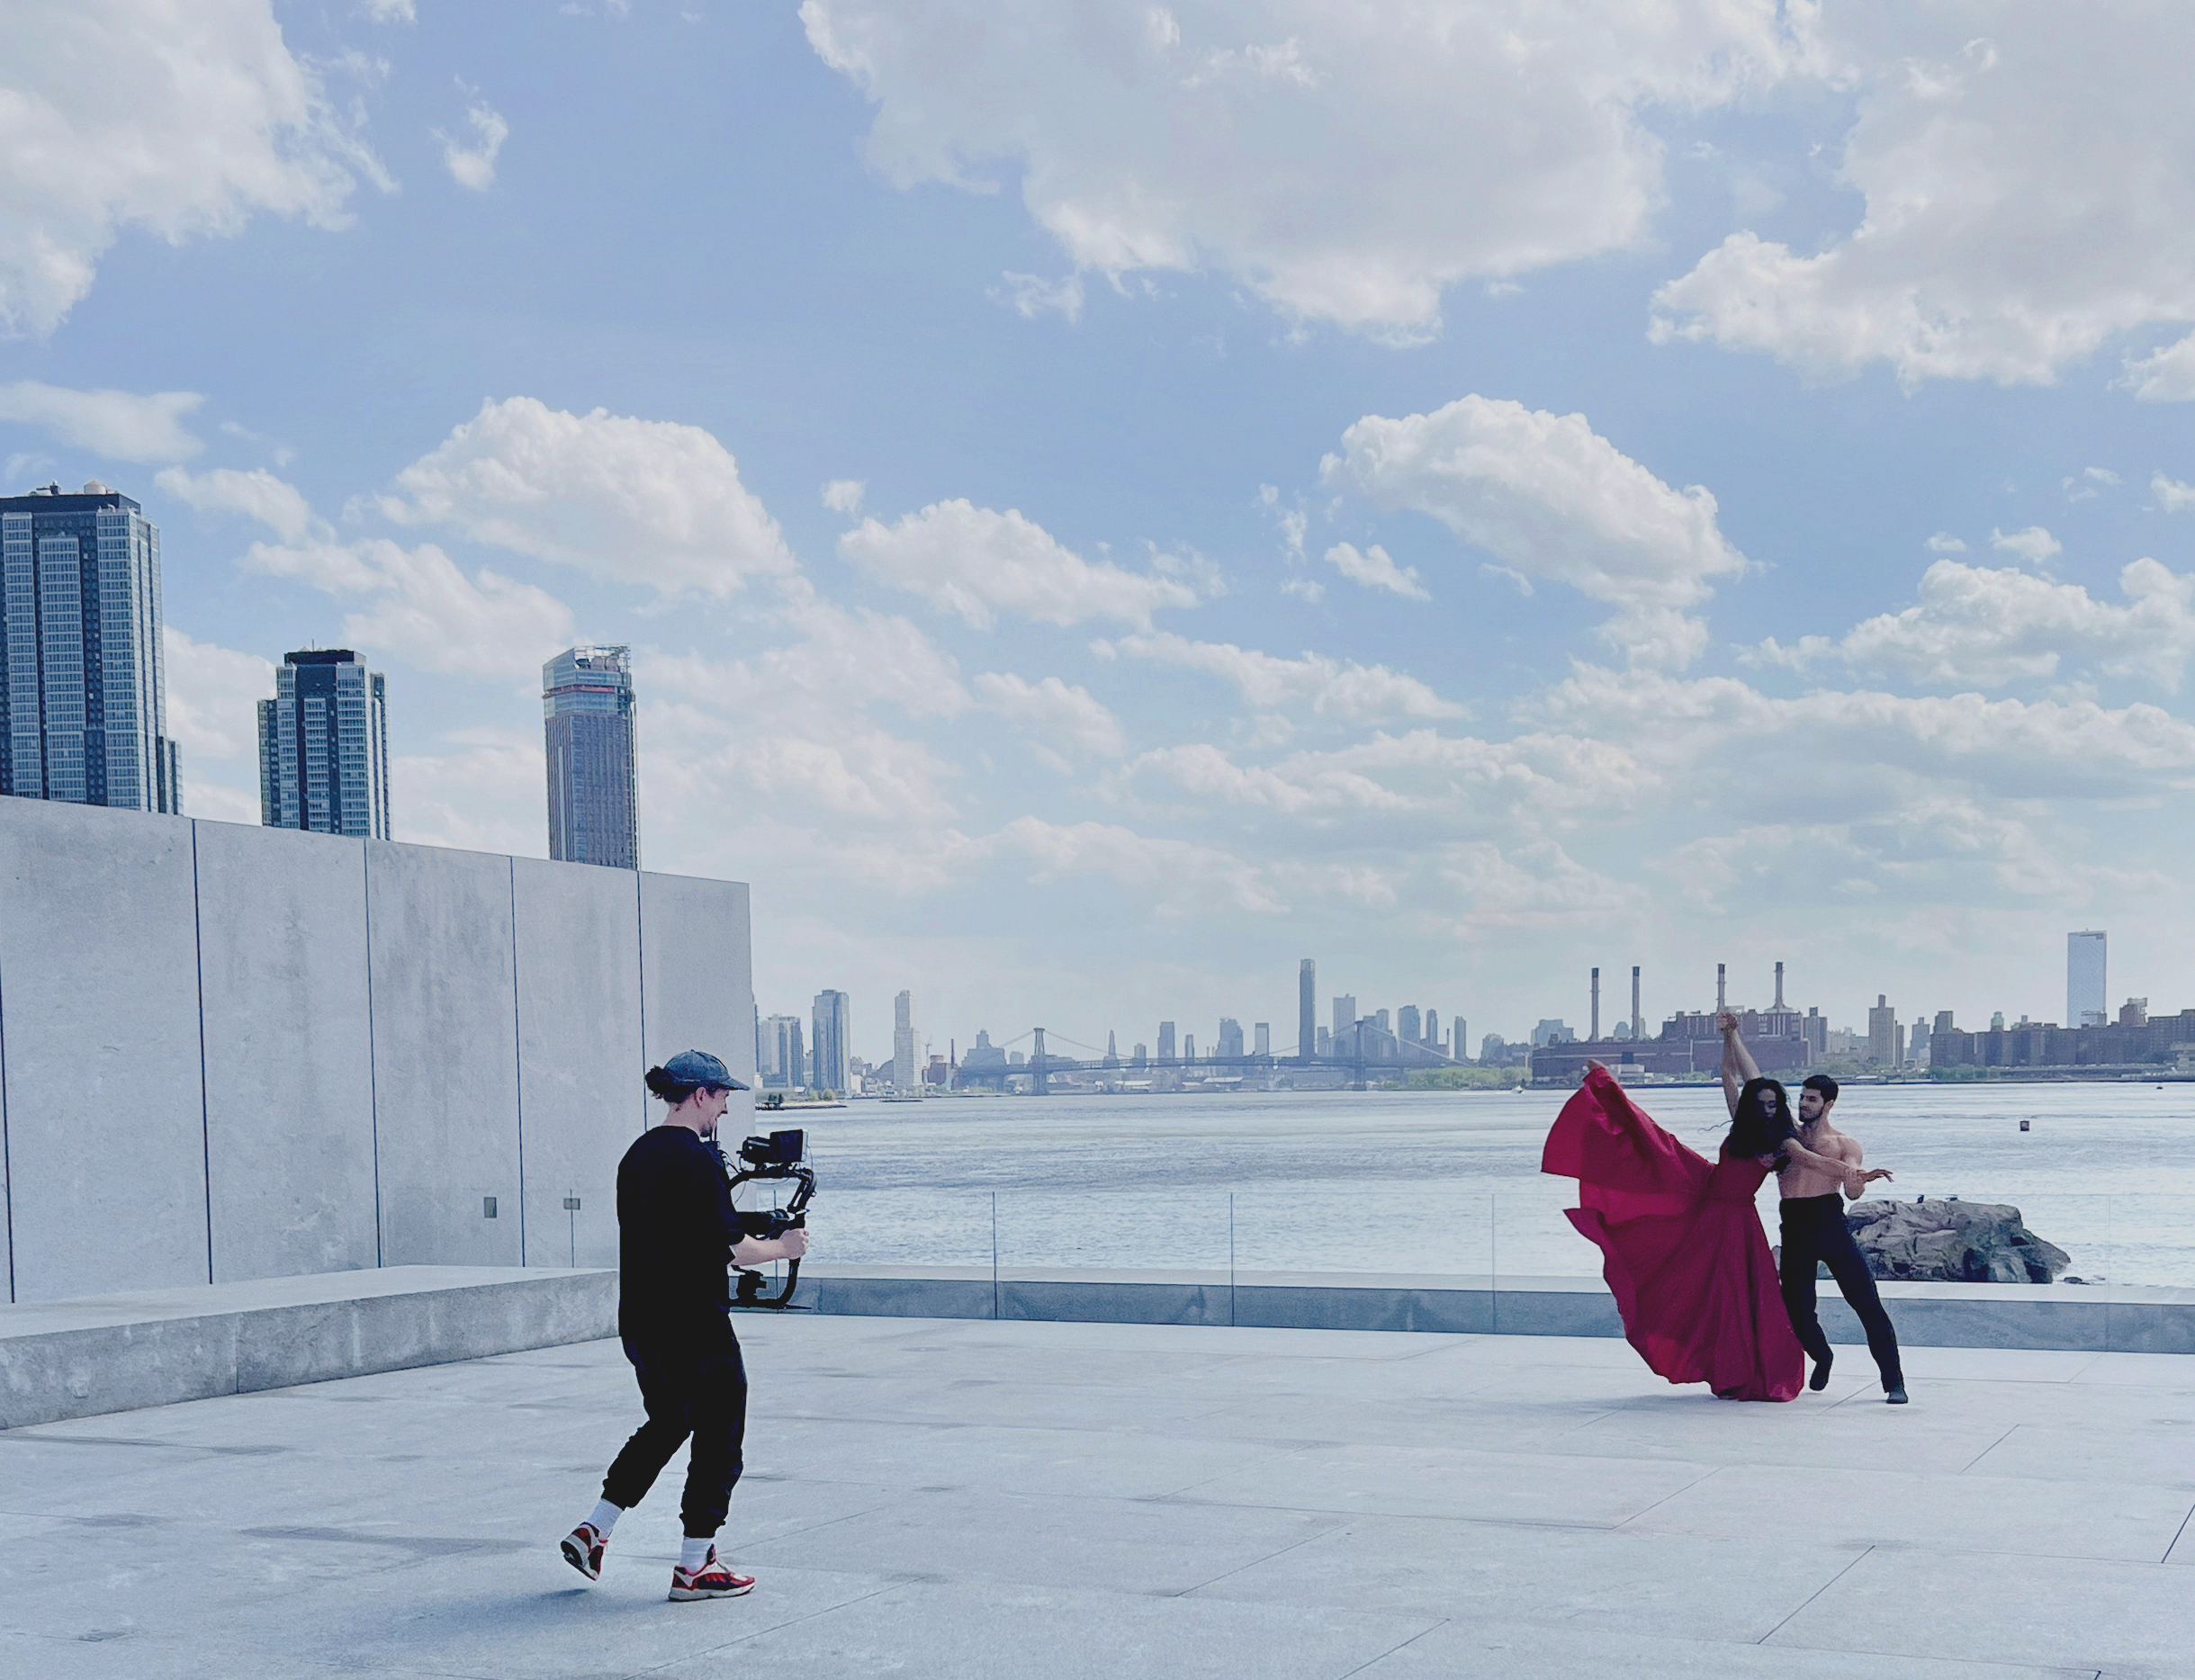 Filming Ballet Hispánico’s Dandara Veiga and Mariano Zamora dancing in Four Freedoms Park, Roosevelt Island.